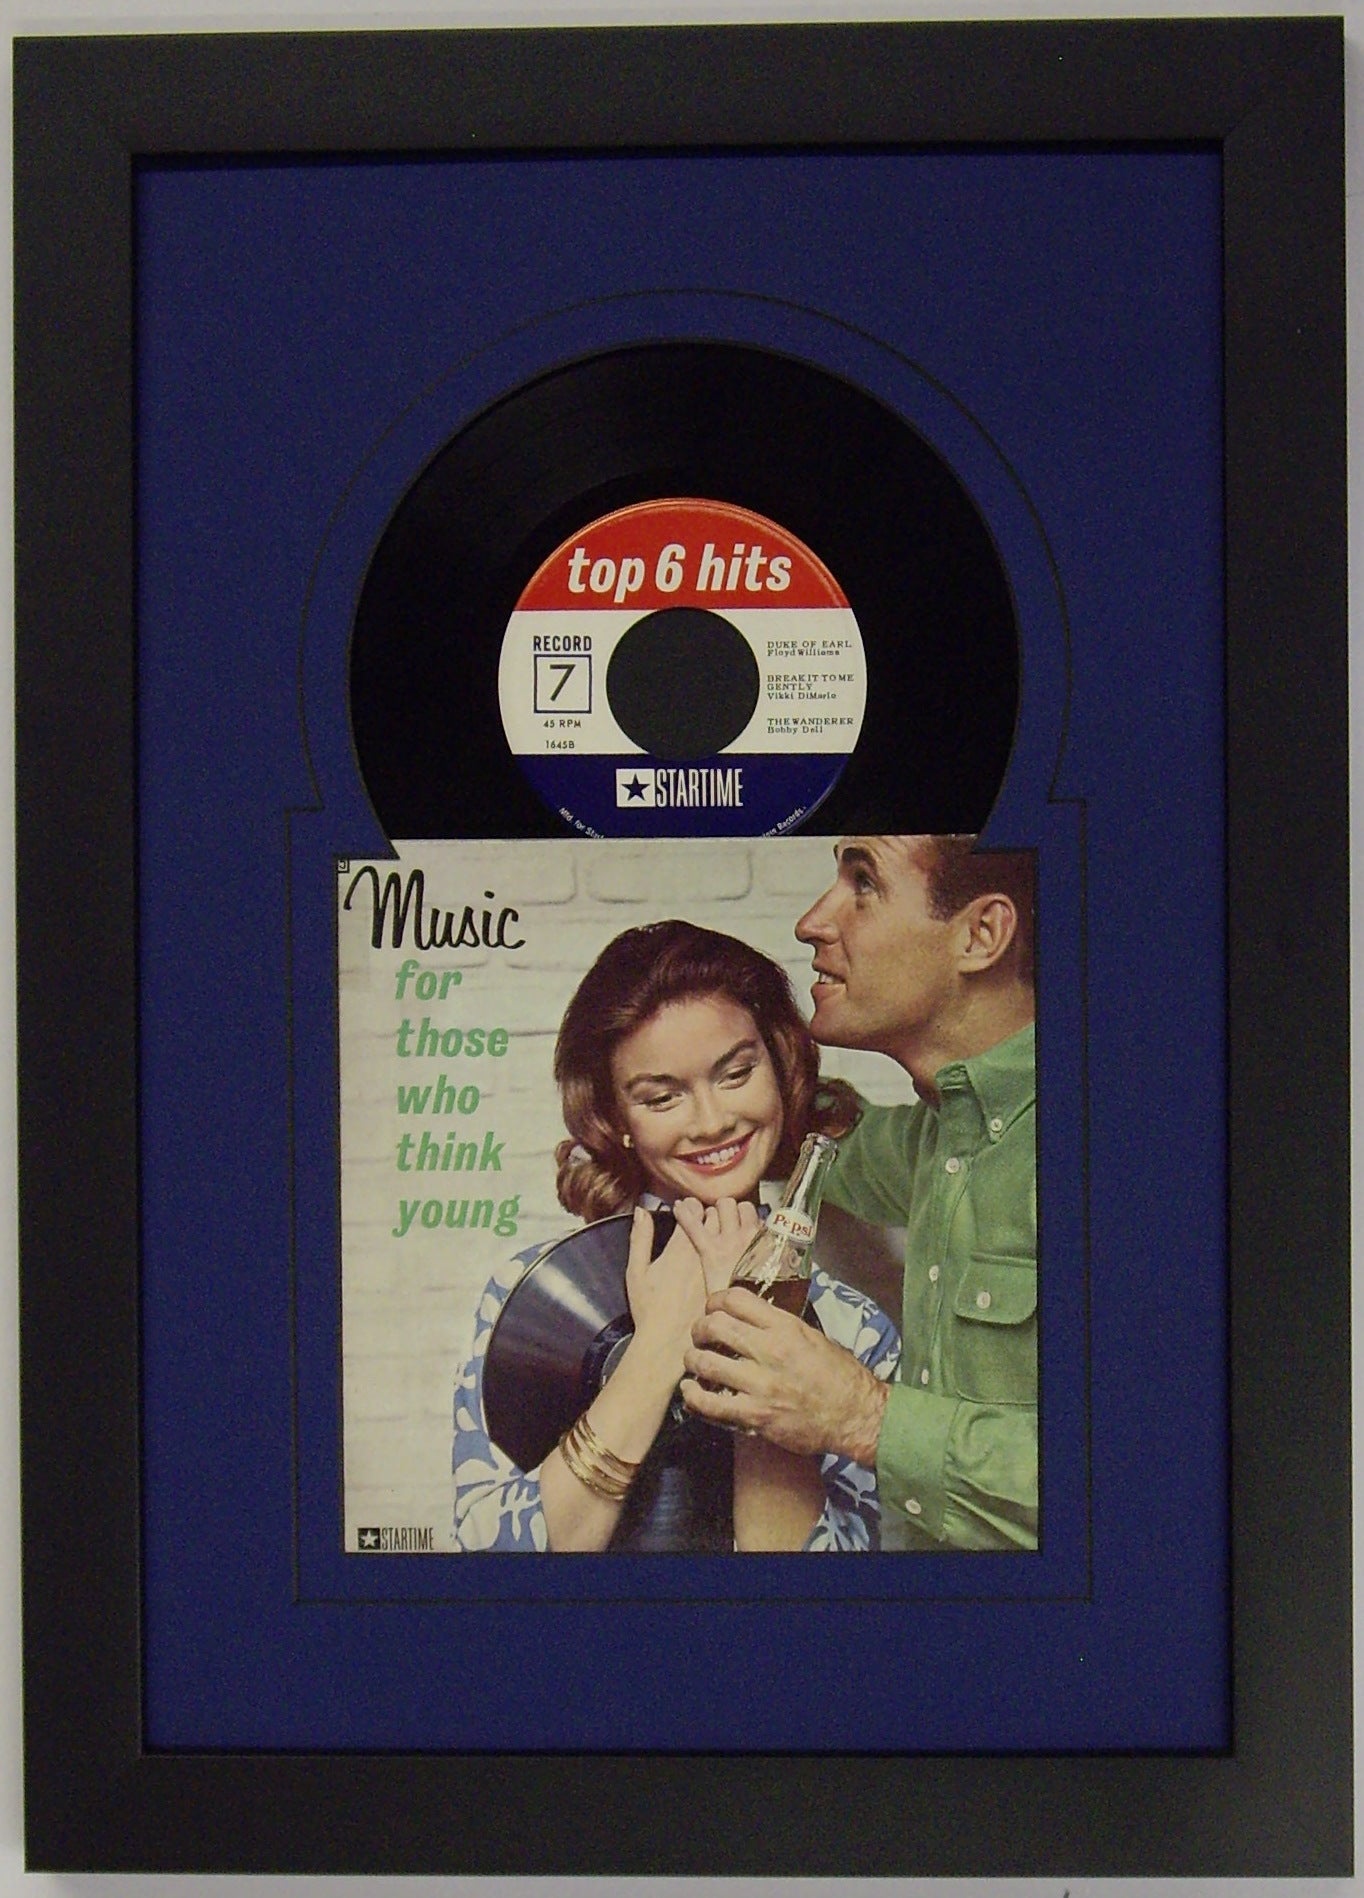 7" 45 Vinyl Record Frame with Sleeve, Jukebox Style - Frame My Collection